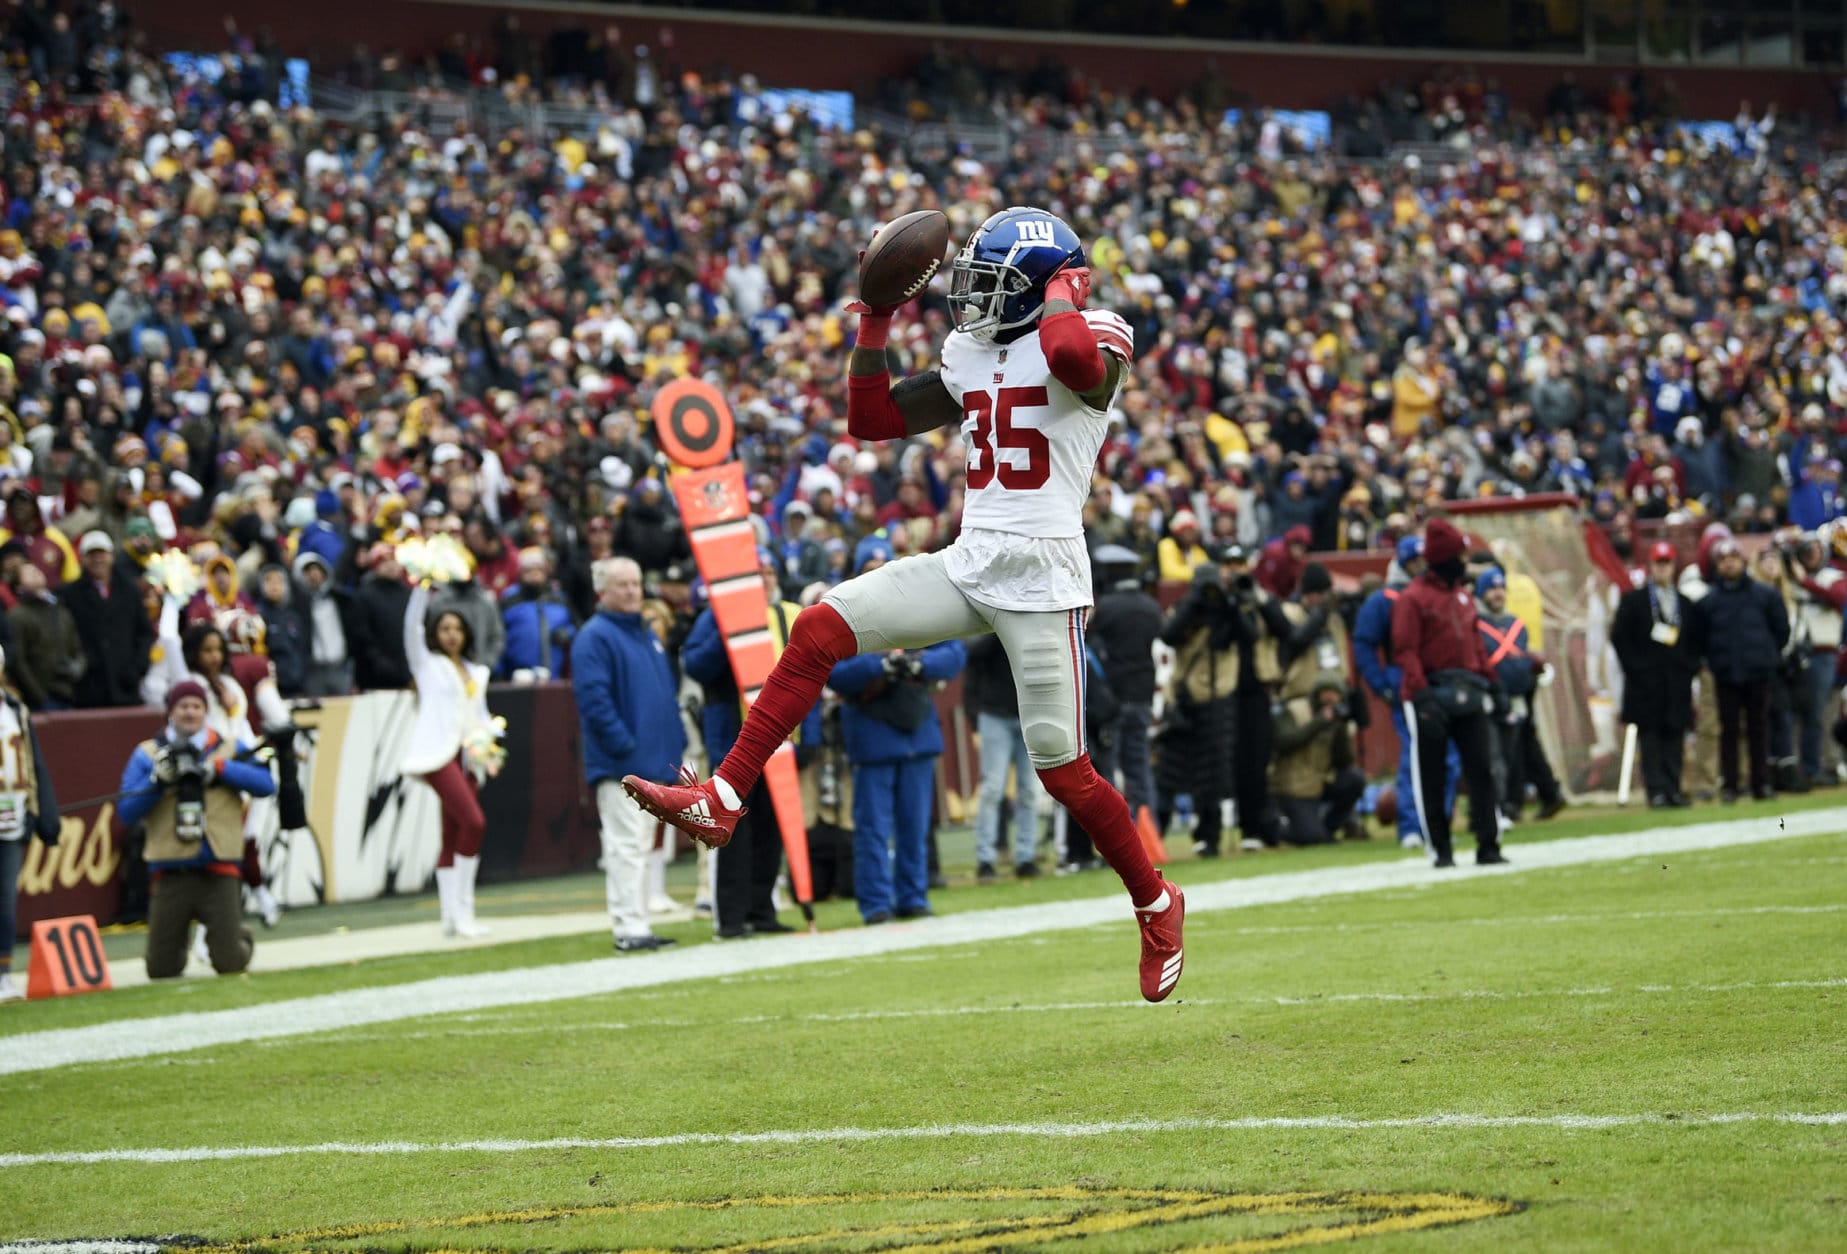 New York Giants free safety Curtis Riley returns his interception into the end zone for a touchdown during the first half of an NFL football game against the Washington Redskins, Sunday, Dec. 9, 2018, in Landover, Md. (AP Photo/Nick Wass)